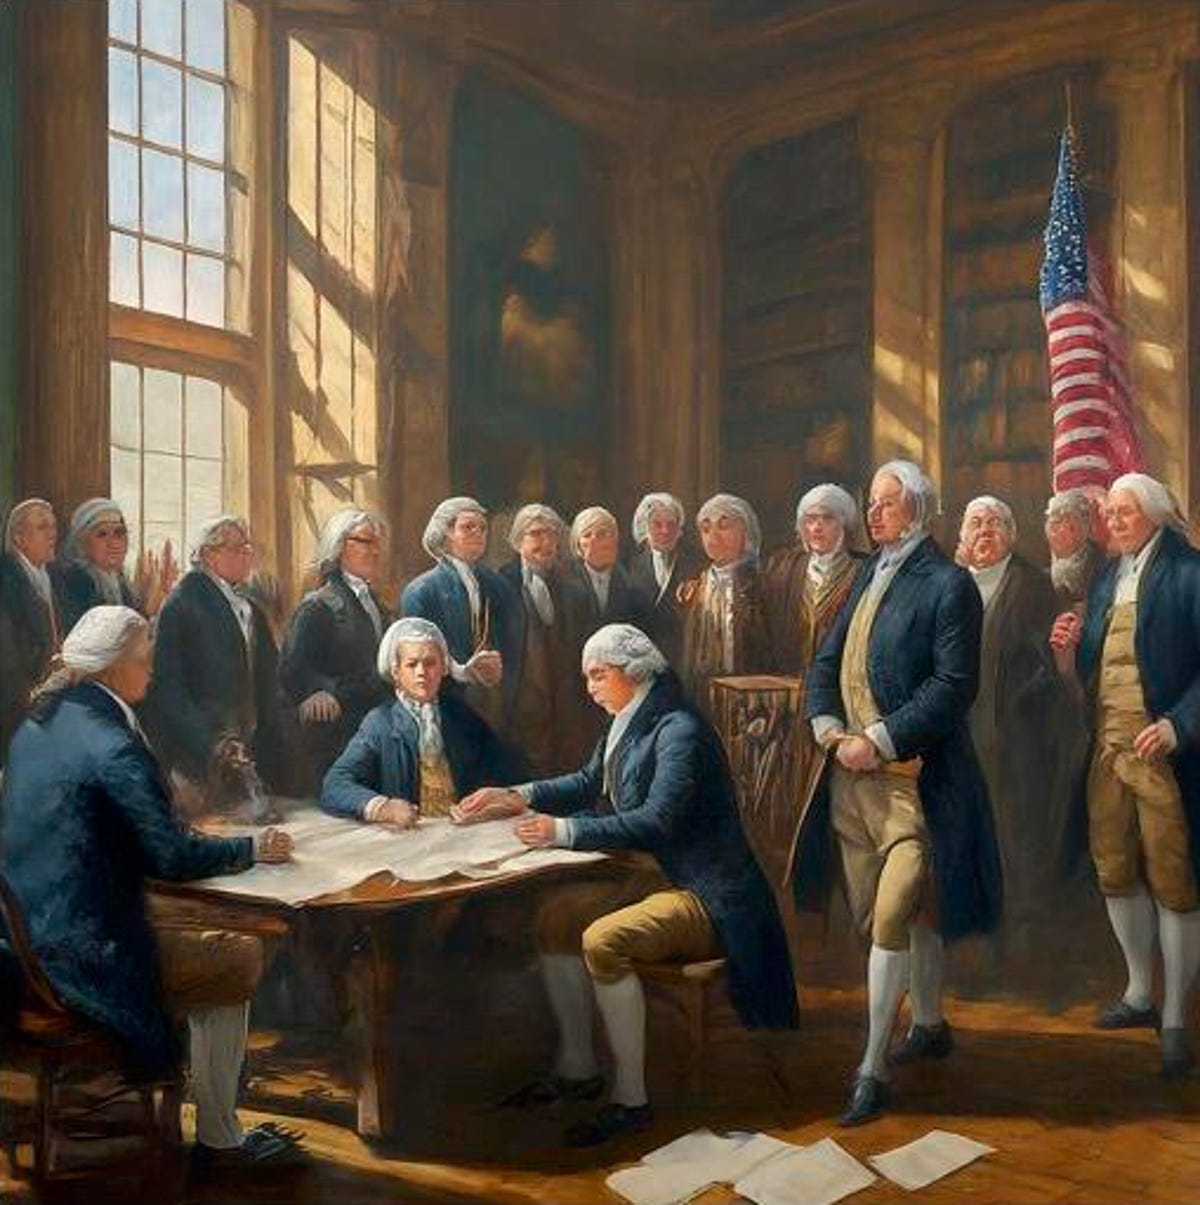 Bard-generated image of the signing of the Declaration of Independence